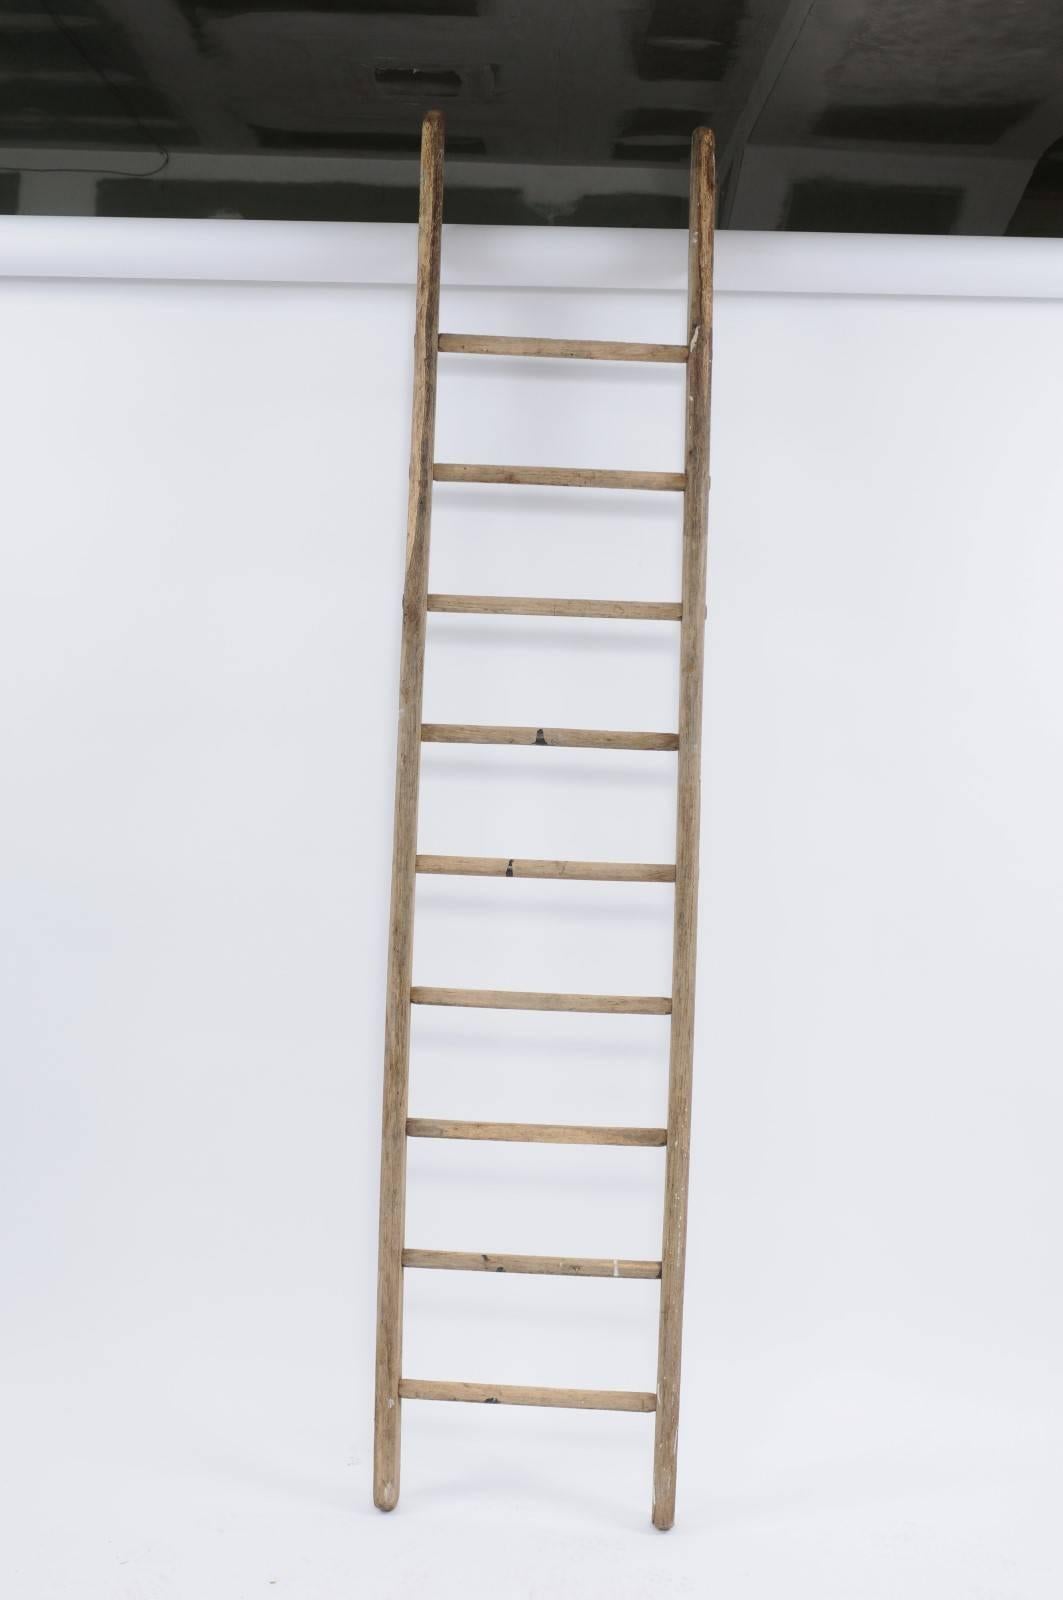 A French large vintage rustic wood and iron ladder from the first half of the 20th century. Everyone needs a ladder! Please don't use this vintage wood and iron rustic ladder to clean your gutters or wash your windows - but do use it as a charming